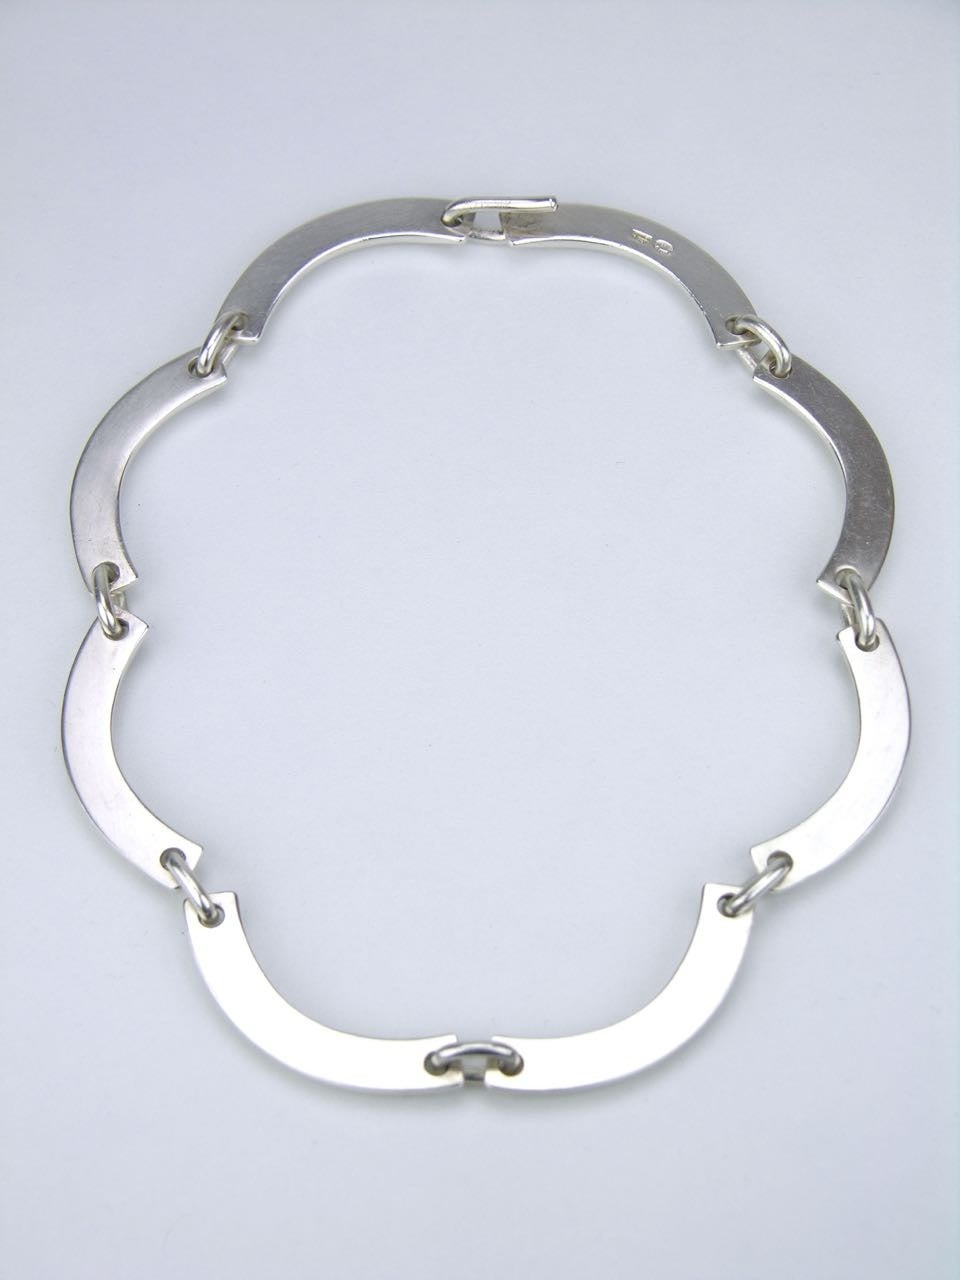 A heavy solid silver segmented necklace made up of eight curved links of a D profile bar motif joined with oval links and a concealed hook closure - marked with post 1945 marks for Georg Jensen of Copenhagen and designed by Hans Hansen

- total